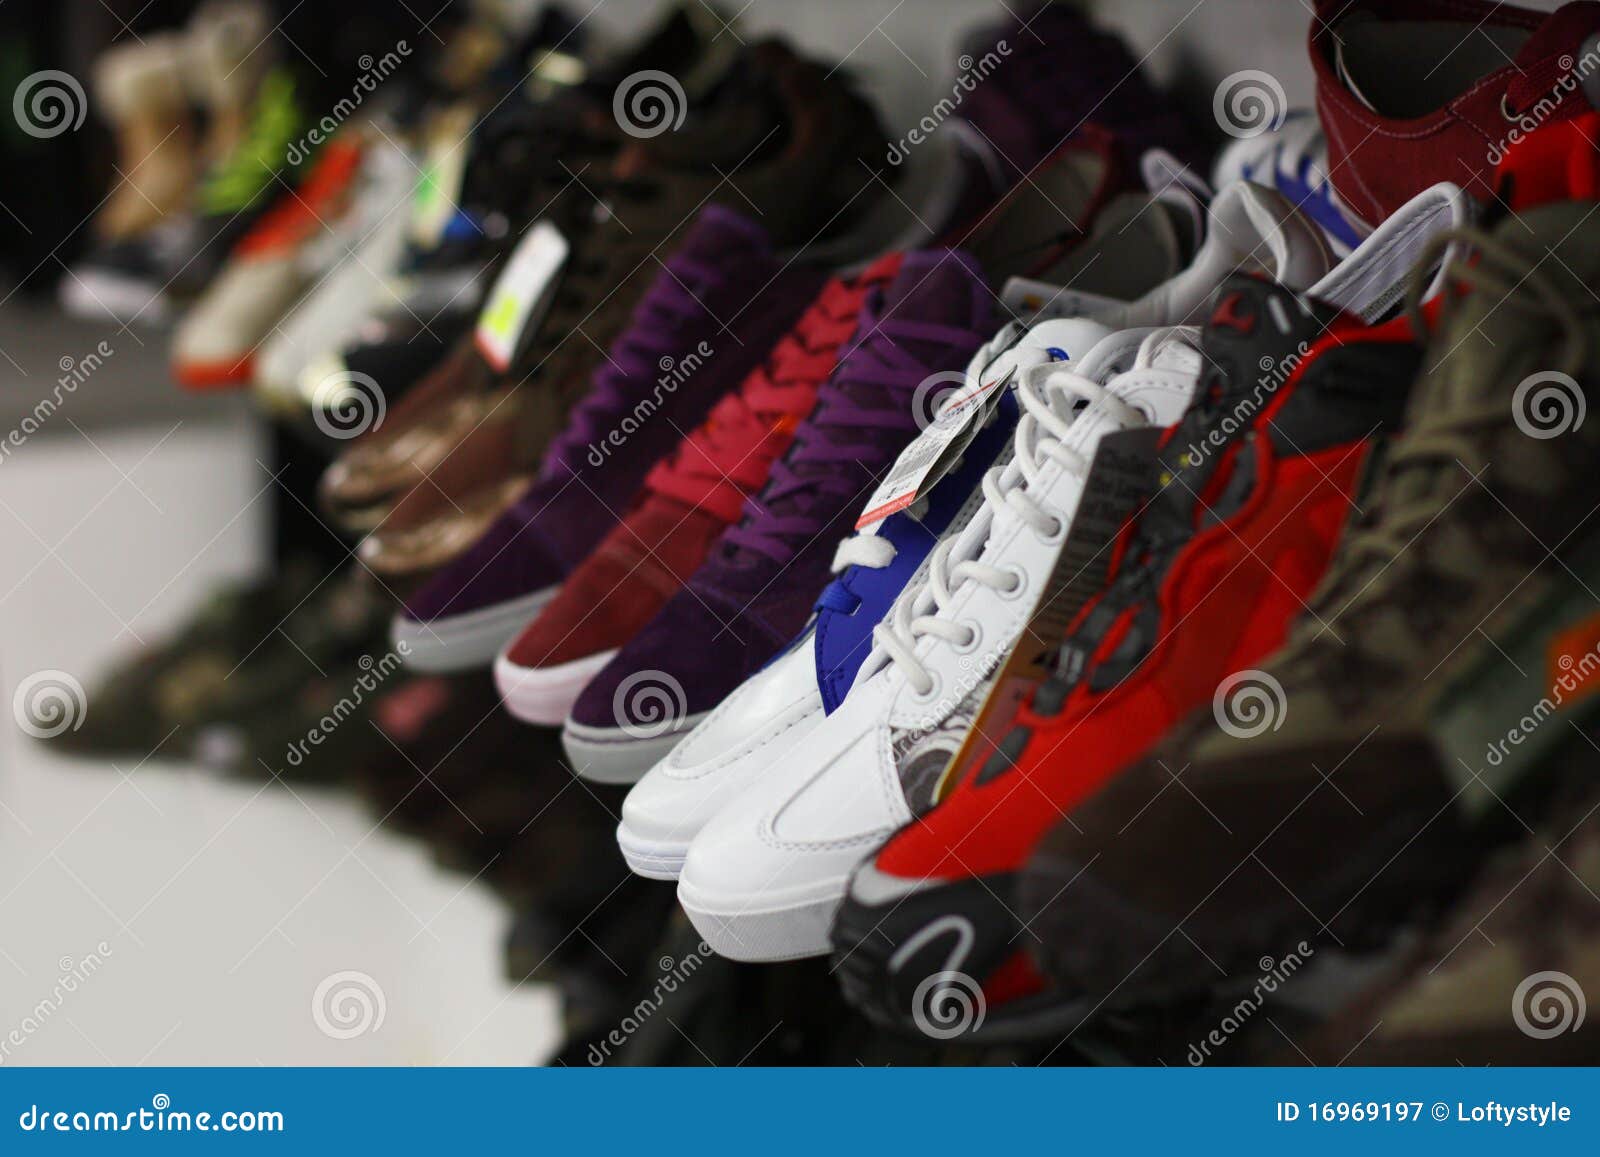 Sport Shoes in Multiple Colors on a Shop Shelf Stock Image - Image of ...